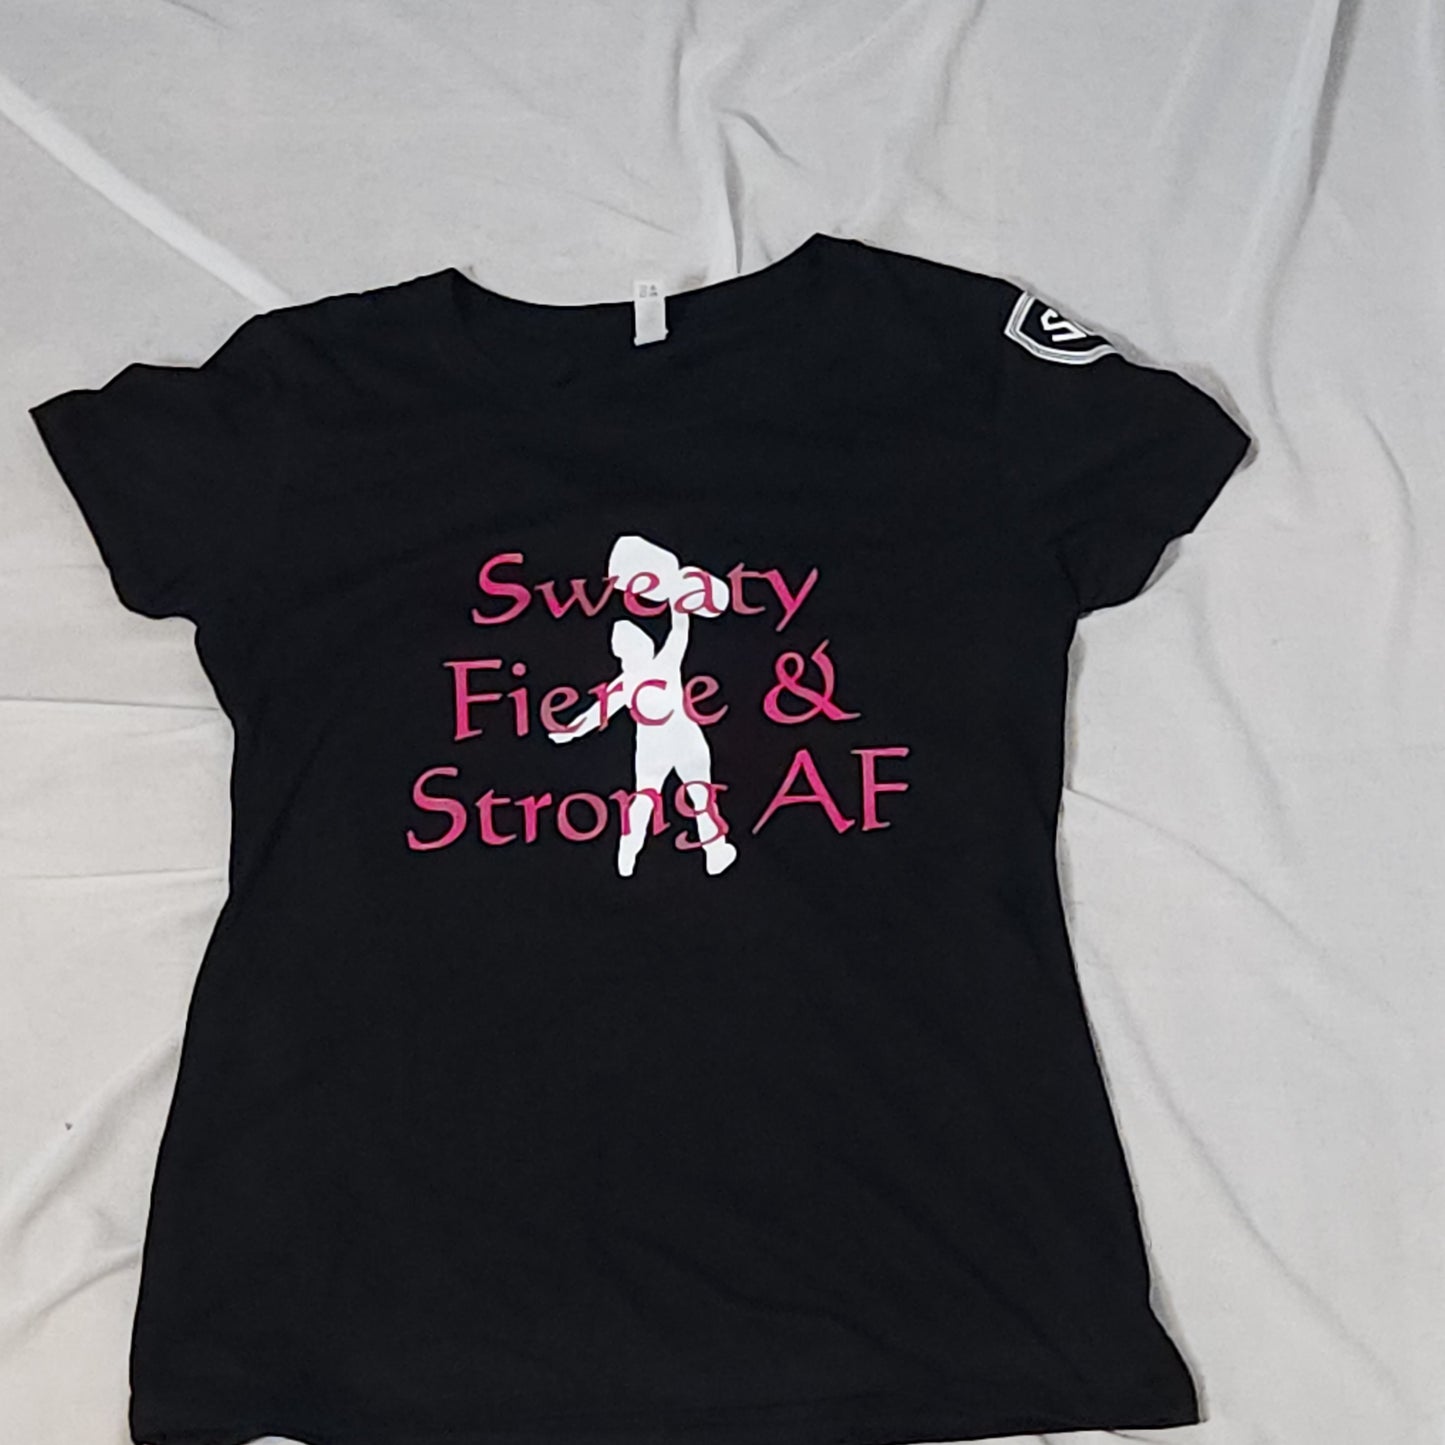 Black Strongbox Apparel Ladies' Cut Tee with hot pink lettering and white graphic on the front, featuring the Strongbox Apparel crest on the sleeve. Tee is called 'Sweaty Fierce and Strong AF' and is available in sizes small through 2X. Designed to keep you comfortable and stylish during workouts.